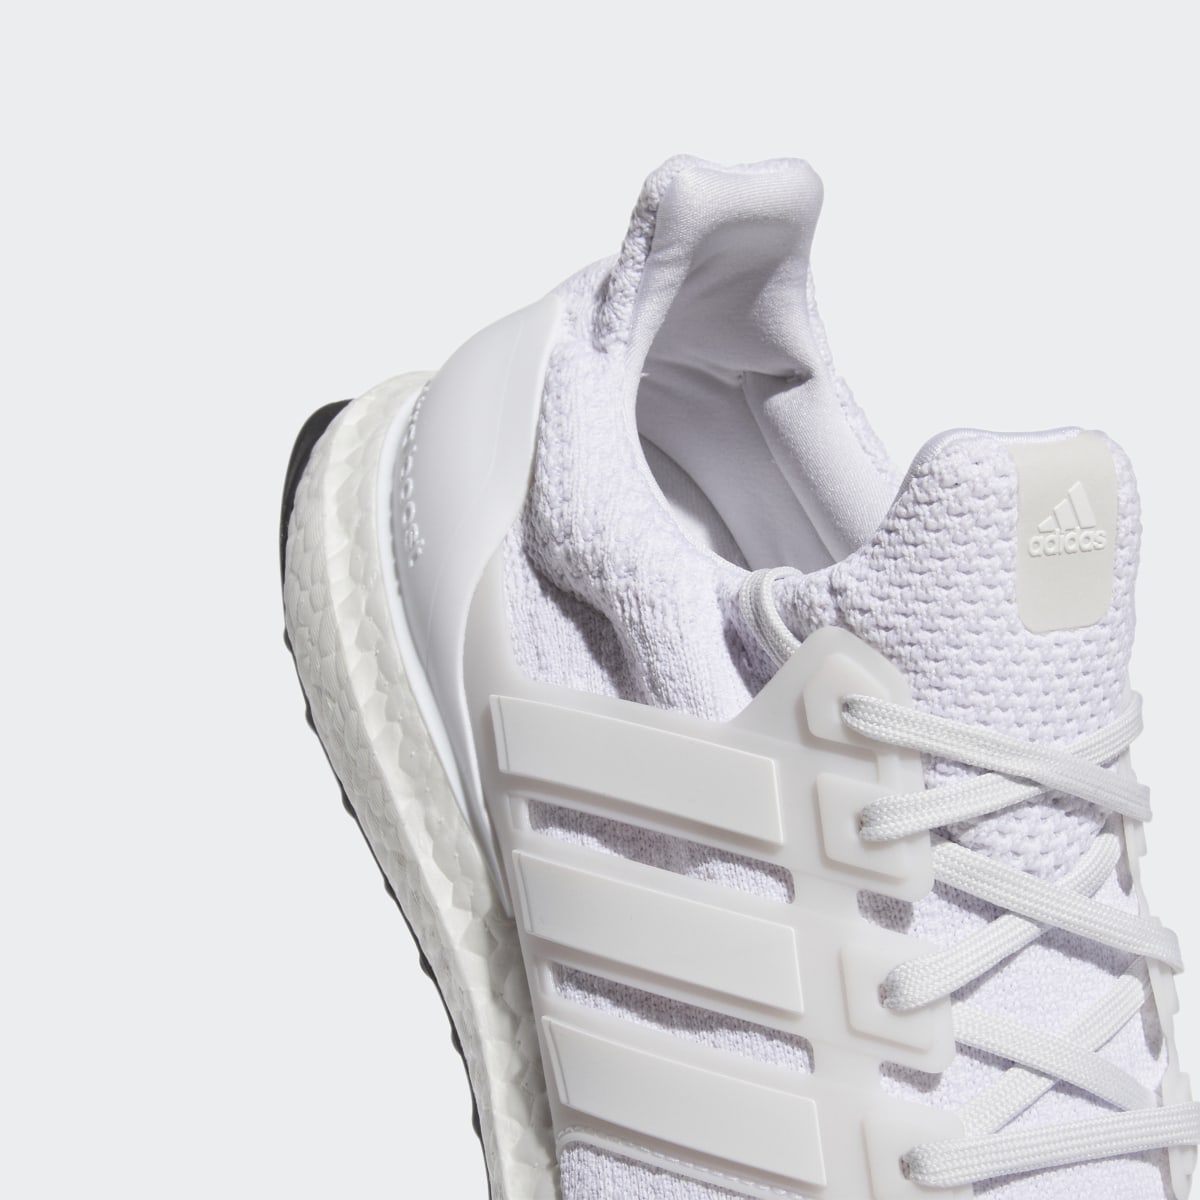 Adidas Ultraboost DNA 5.0 Shoes. 10